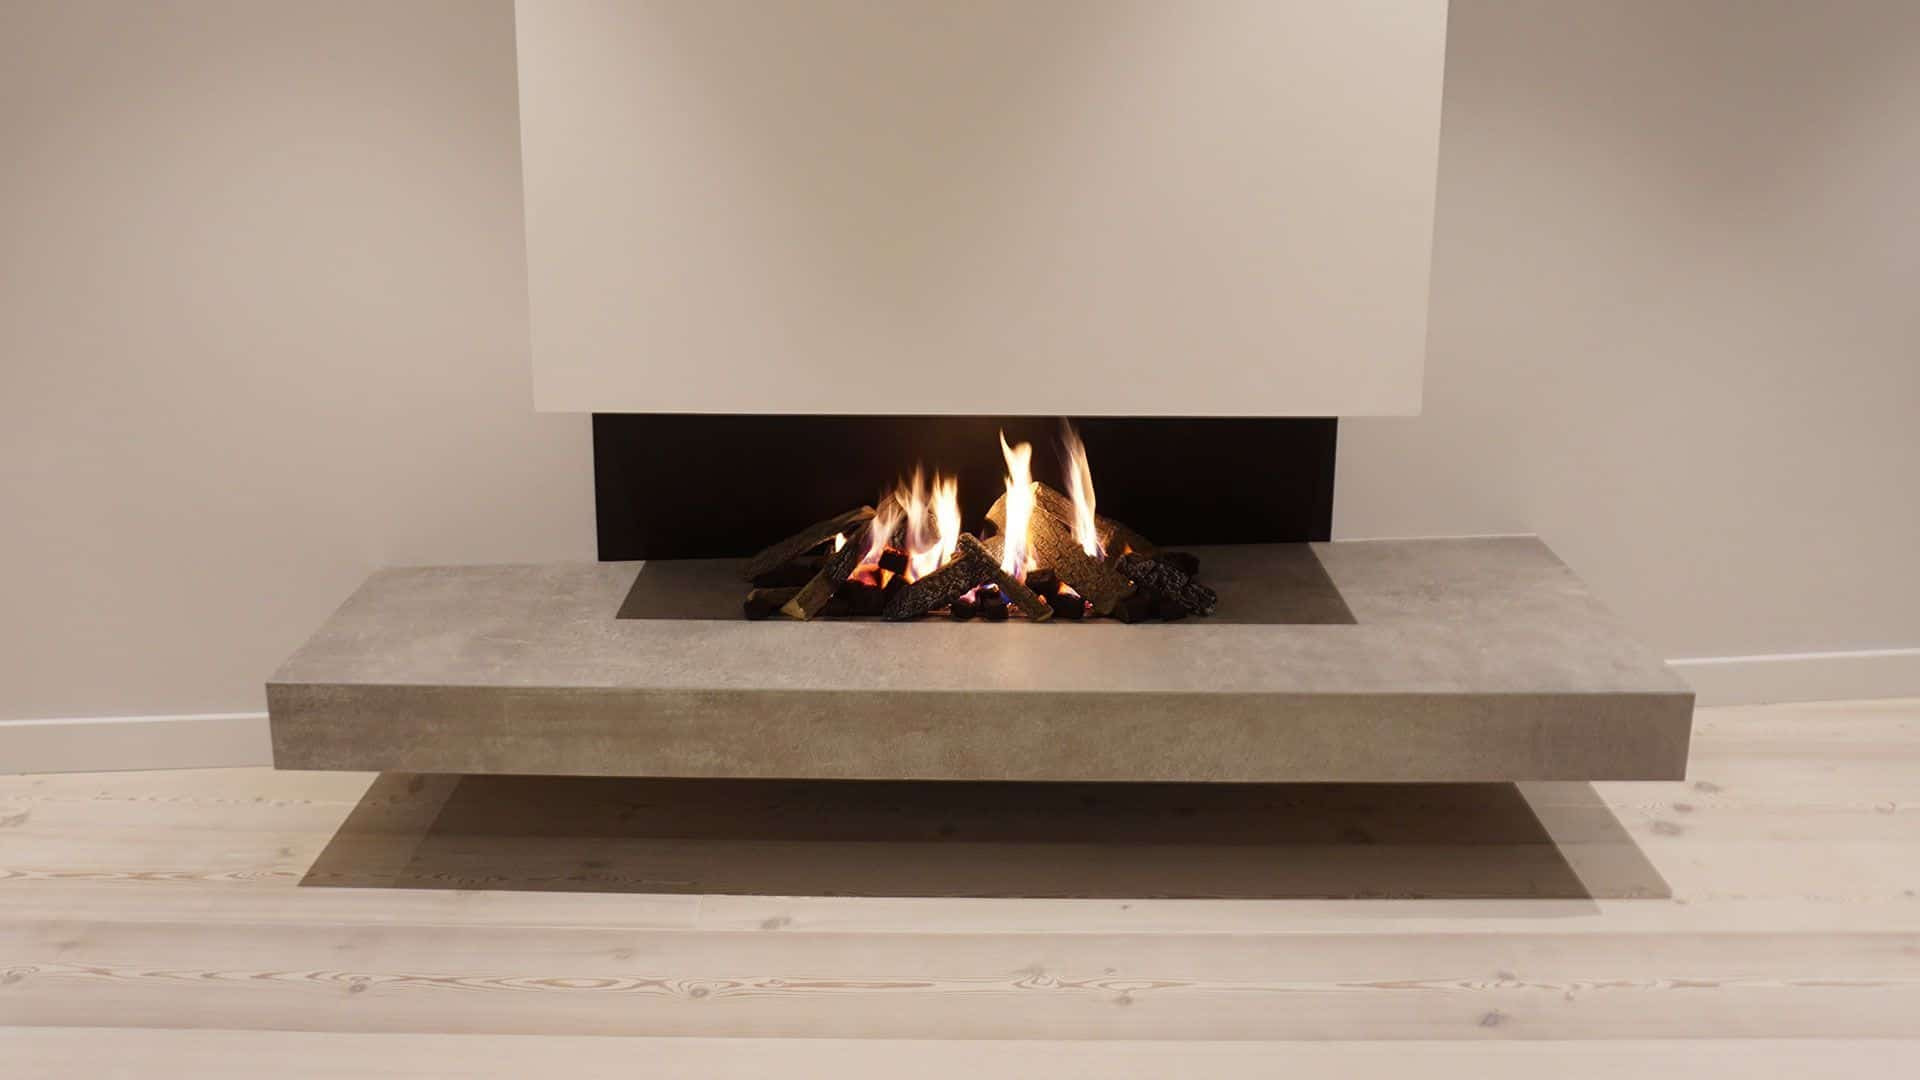 Natural vent gas fireplaces may use an existing chimney flue to vent waste air, direct vent gas fireplaces will have a flue in the form of a direct vent our own gas fireplace is a natural vent type meaning that it sits within an open masonry fireplace and utilizes the existing chimney flue for venting. Fireplaces London Fireplace Installation London Gas Fires London